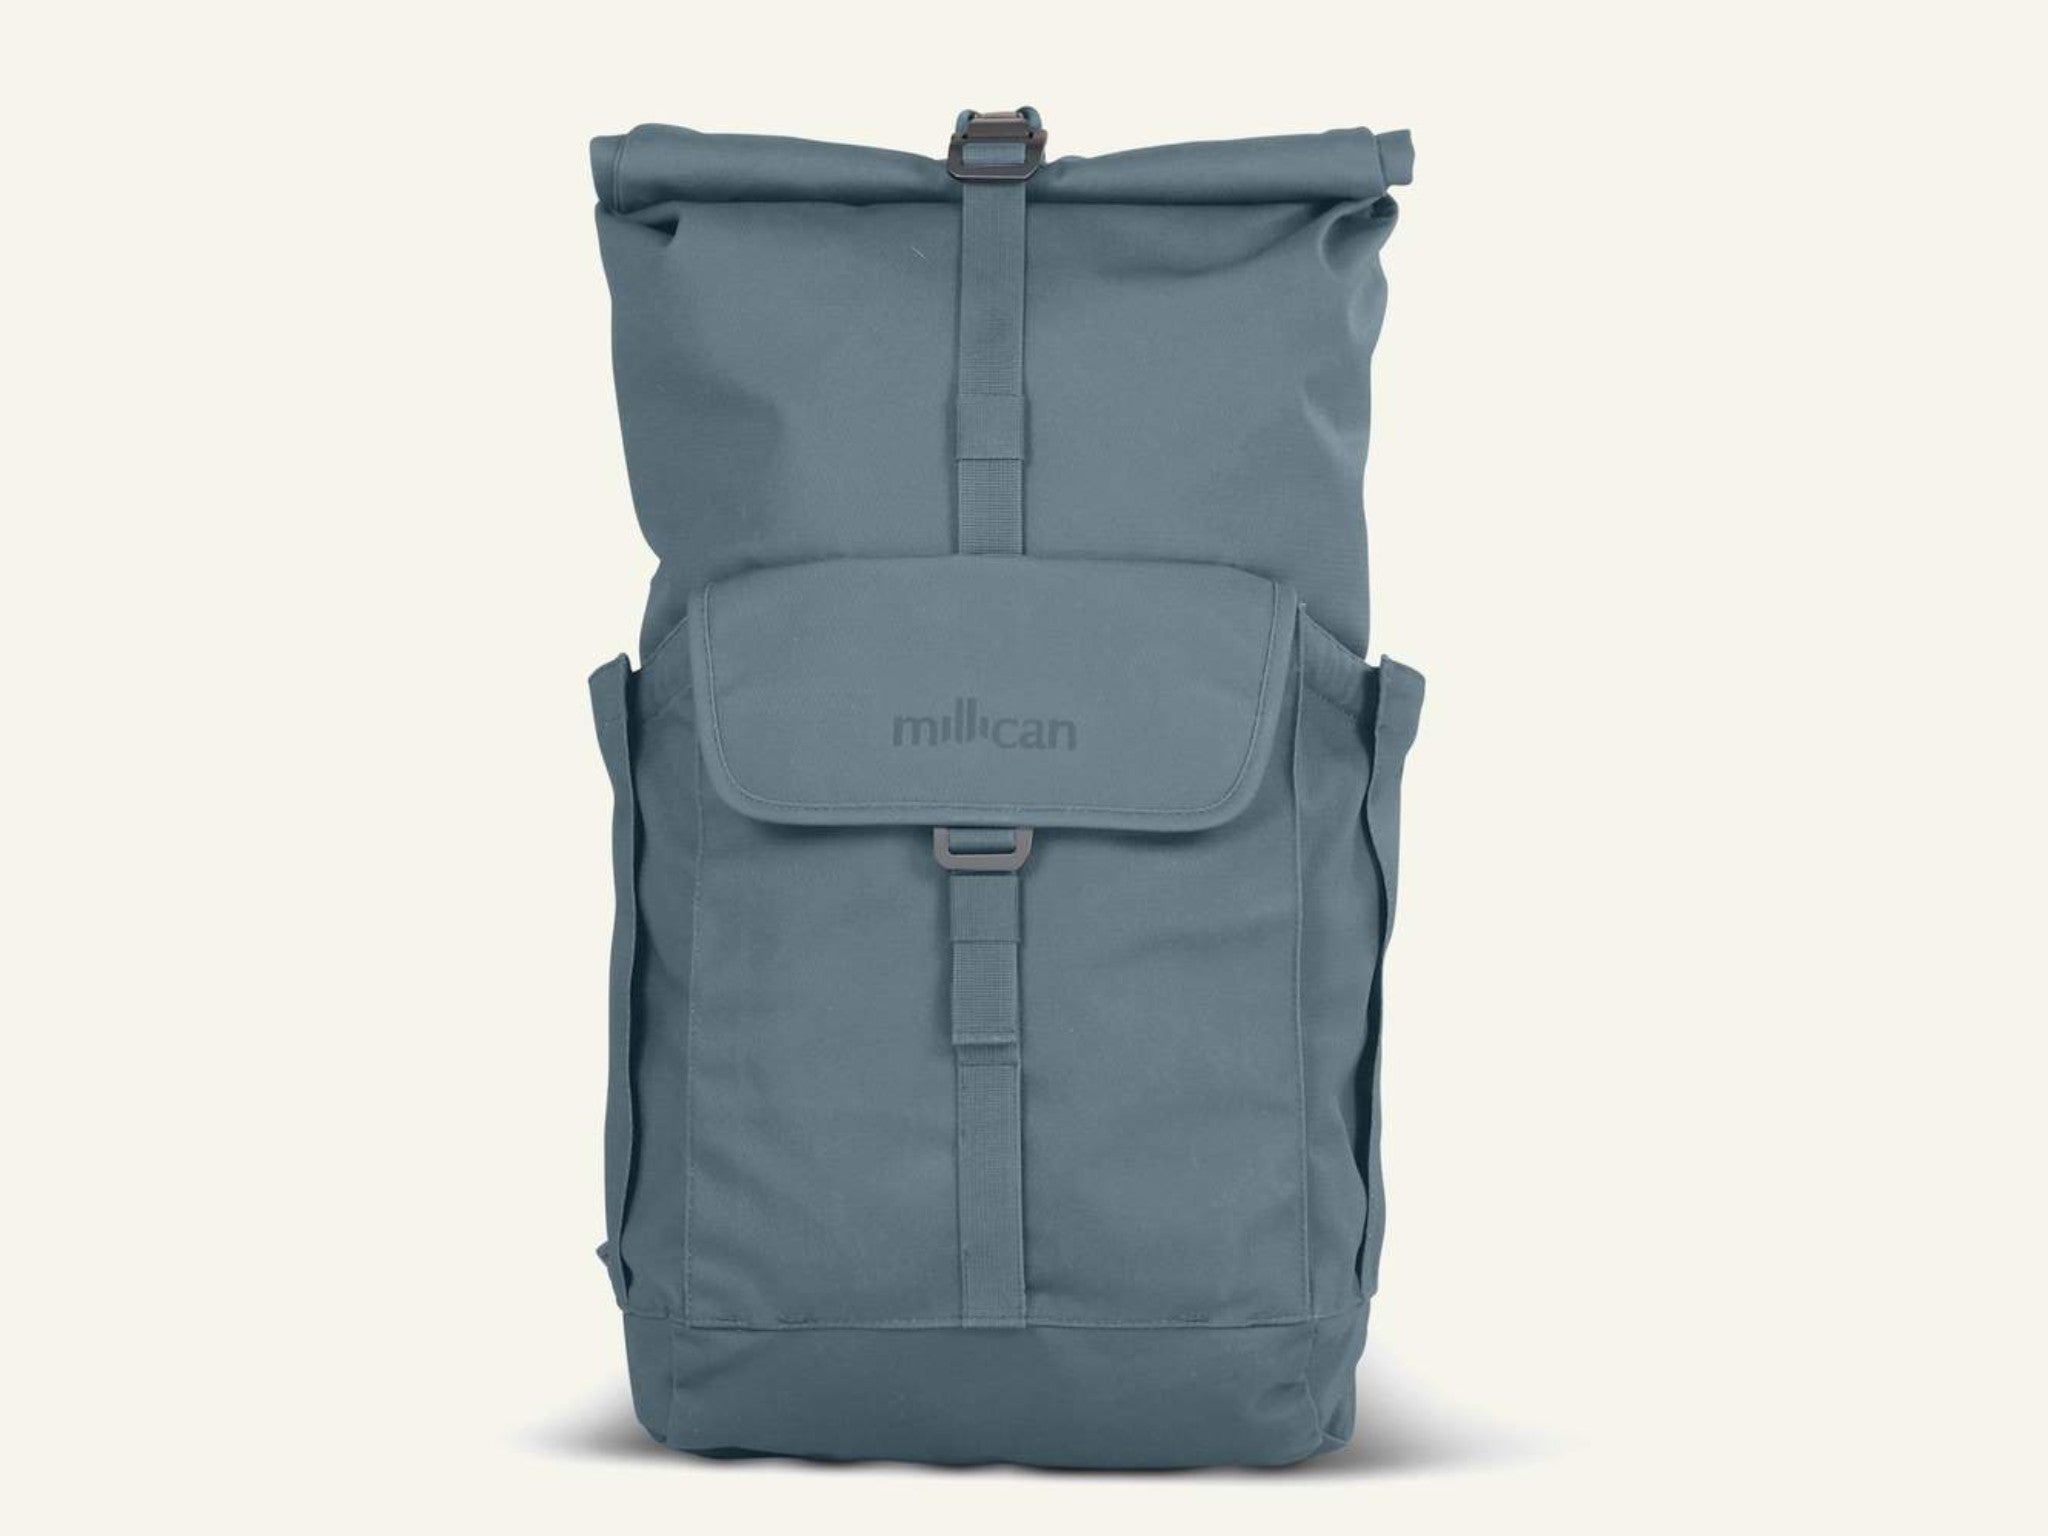 Millican smith rollpack